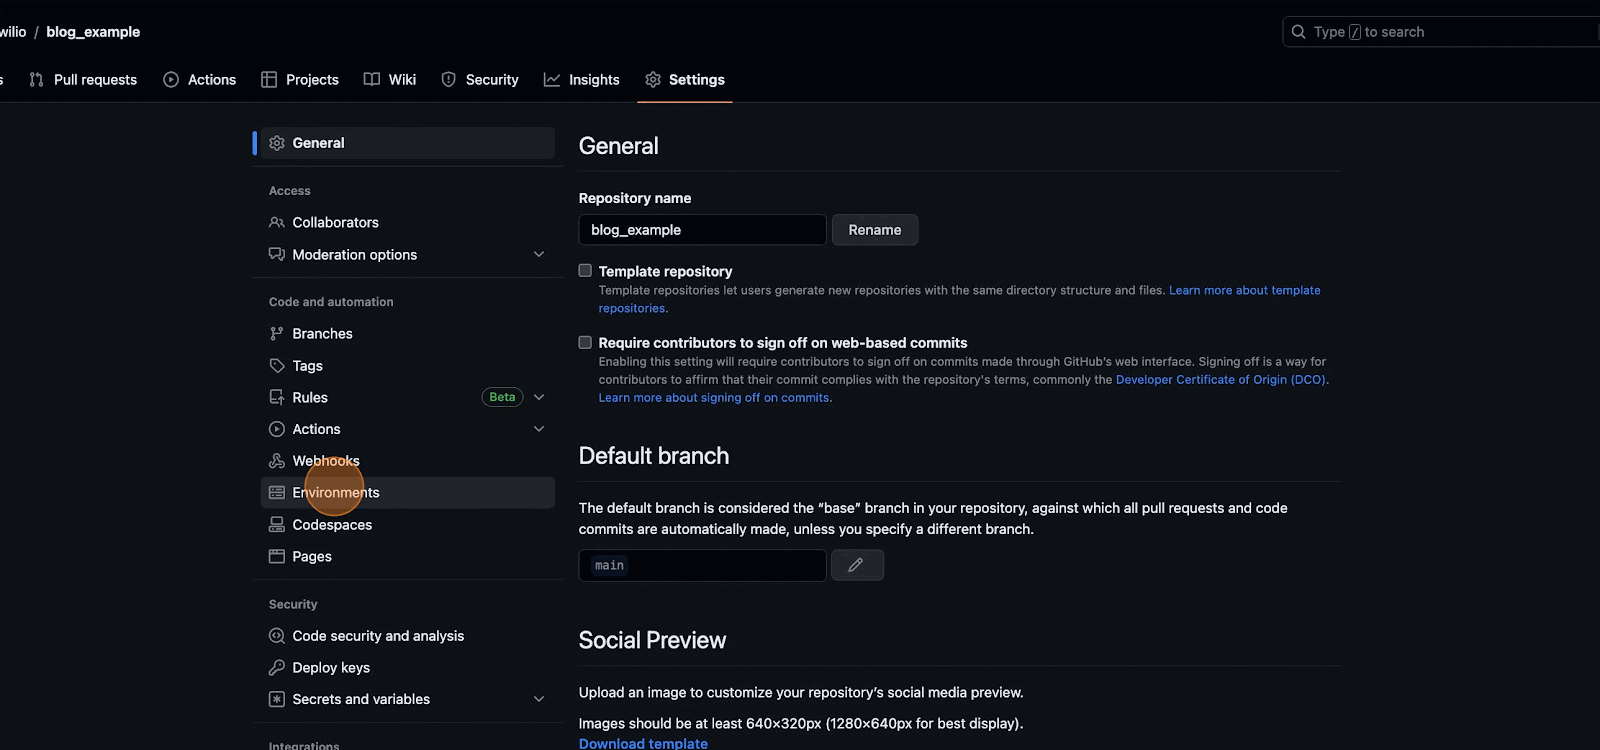 A gif of the "Environments" part of your GitHub. In the gif, the "New Environment" button is clicked, a name is given, and the environment is configured.